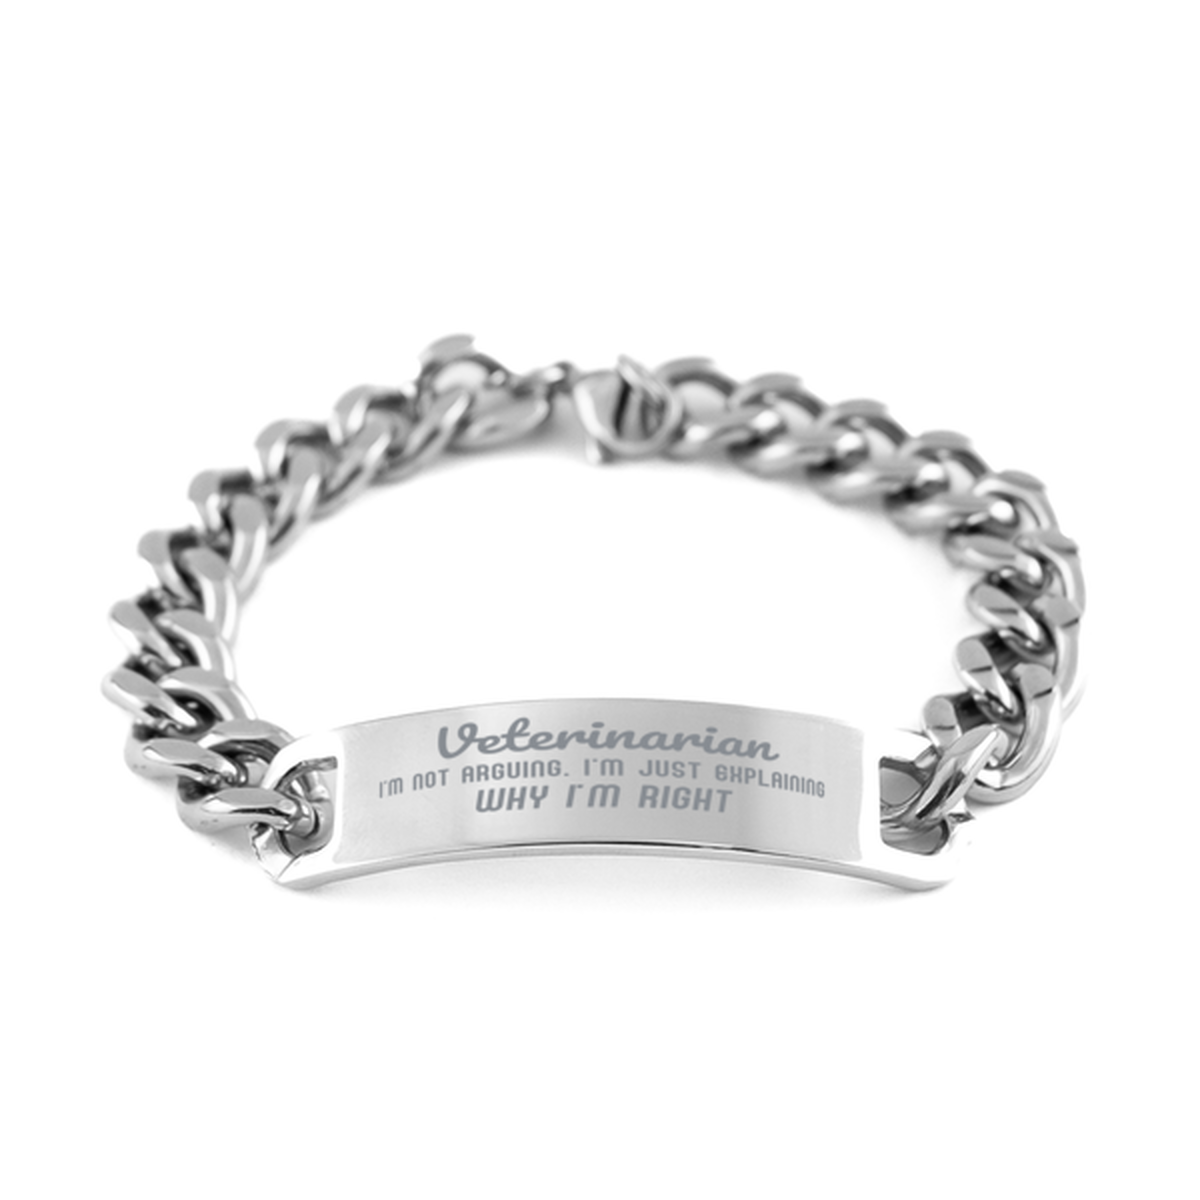 Veterinarian I'm not Arguing. I'm Just Explaining Why I'm RIGHT Cuban Chain Stainless Steel Bracelet, Graduation Birthday Christmas Veterinarian Gifts For Veterinarian Funny Saying Quote Present for Men Women Coworker